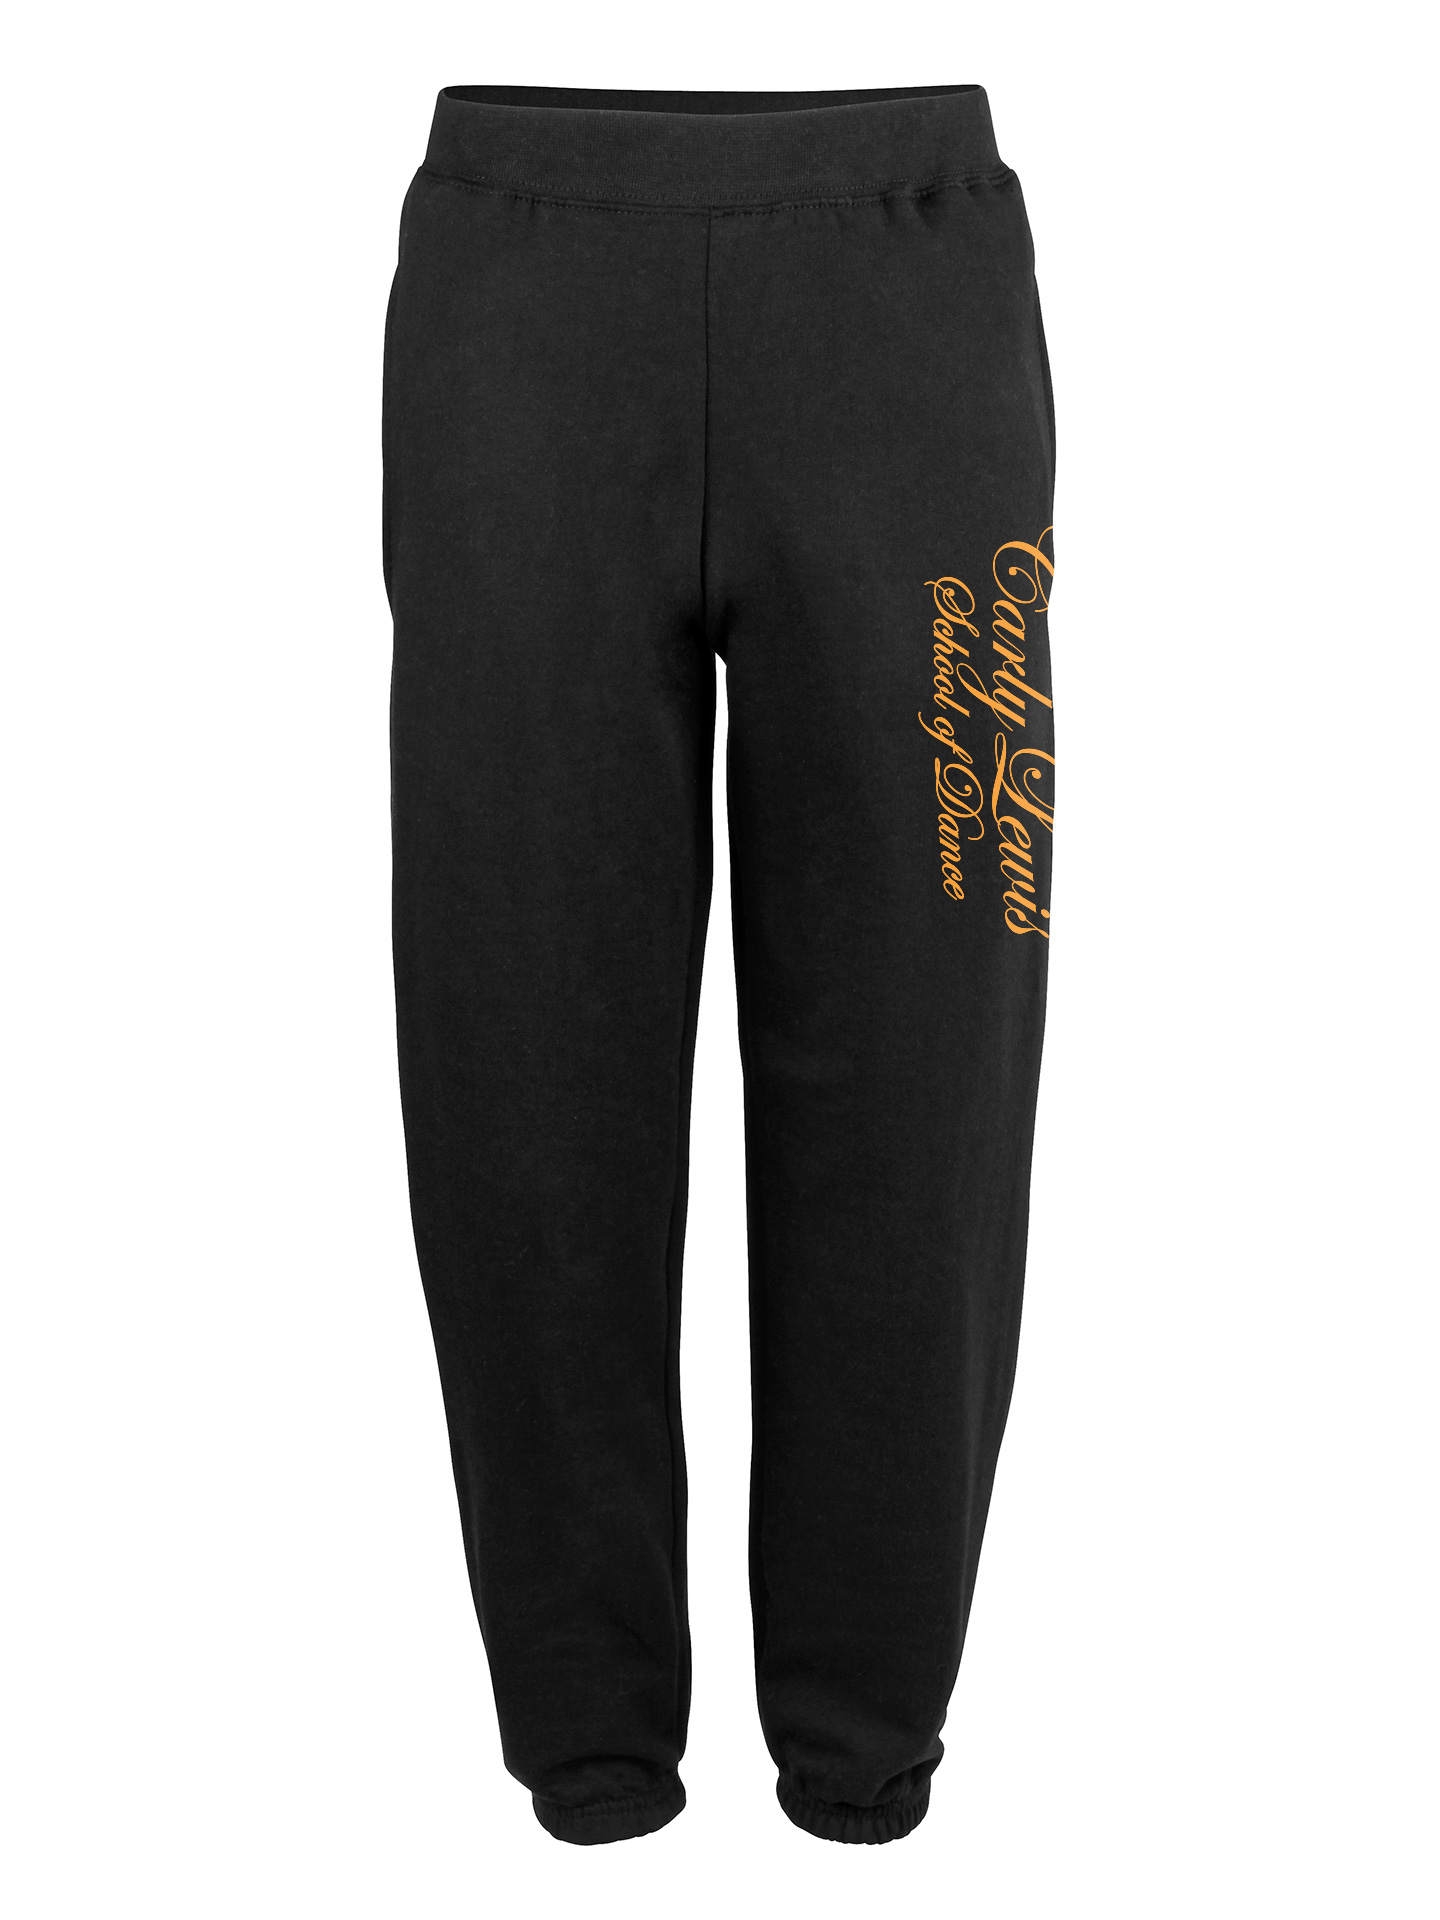 Carly Lewis School of Dance Cuffed Joggers | Rock the Dragon